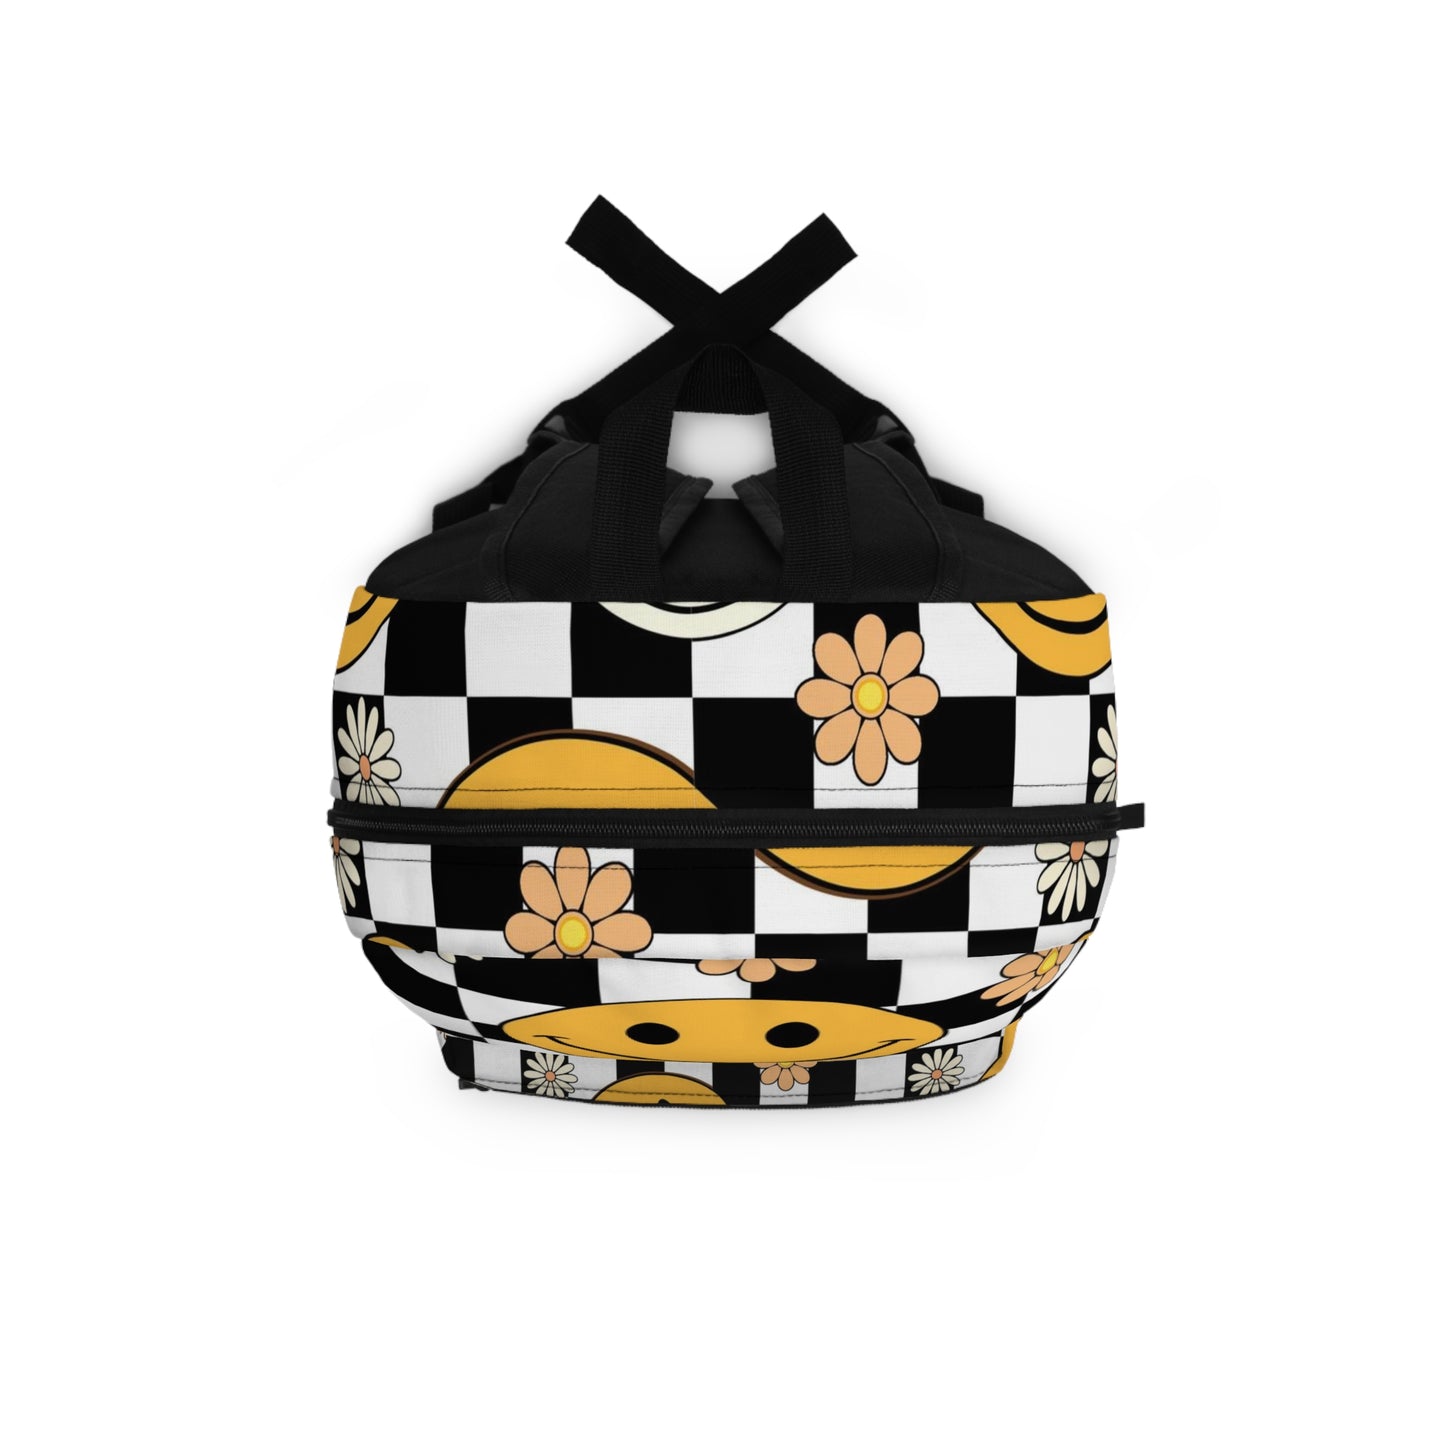 Happy face and Daisy flowers Backpack. Black and white Checkered and yellow and white happy face backpack for him or her. Back to school bag